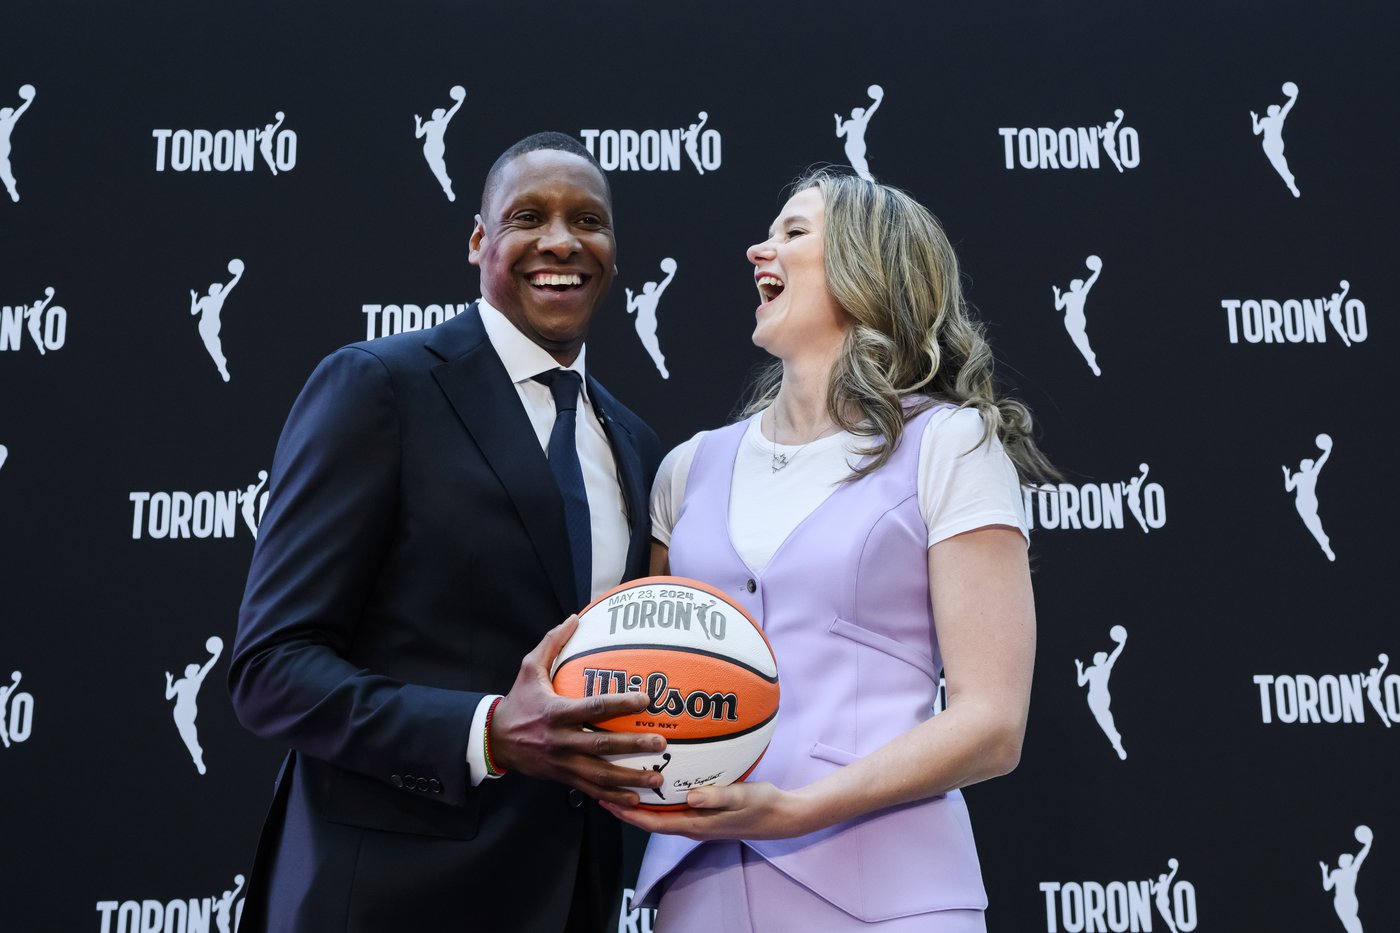 Toronto WNBA team arrives at ‘critical moment in history’ for women’s sports: expert